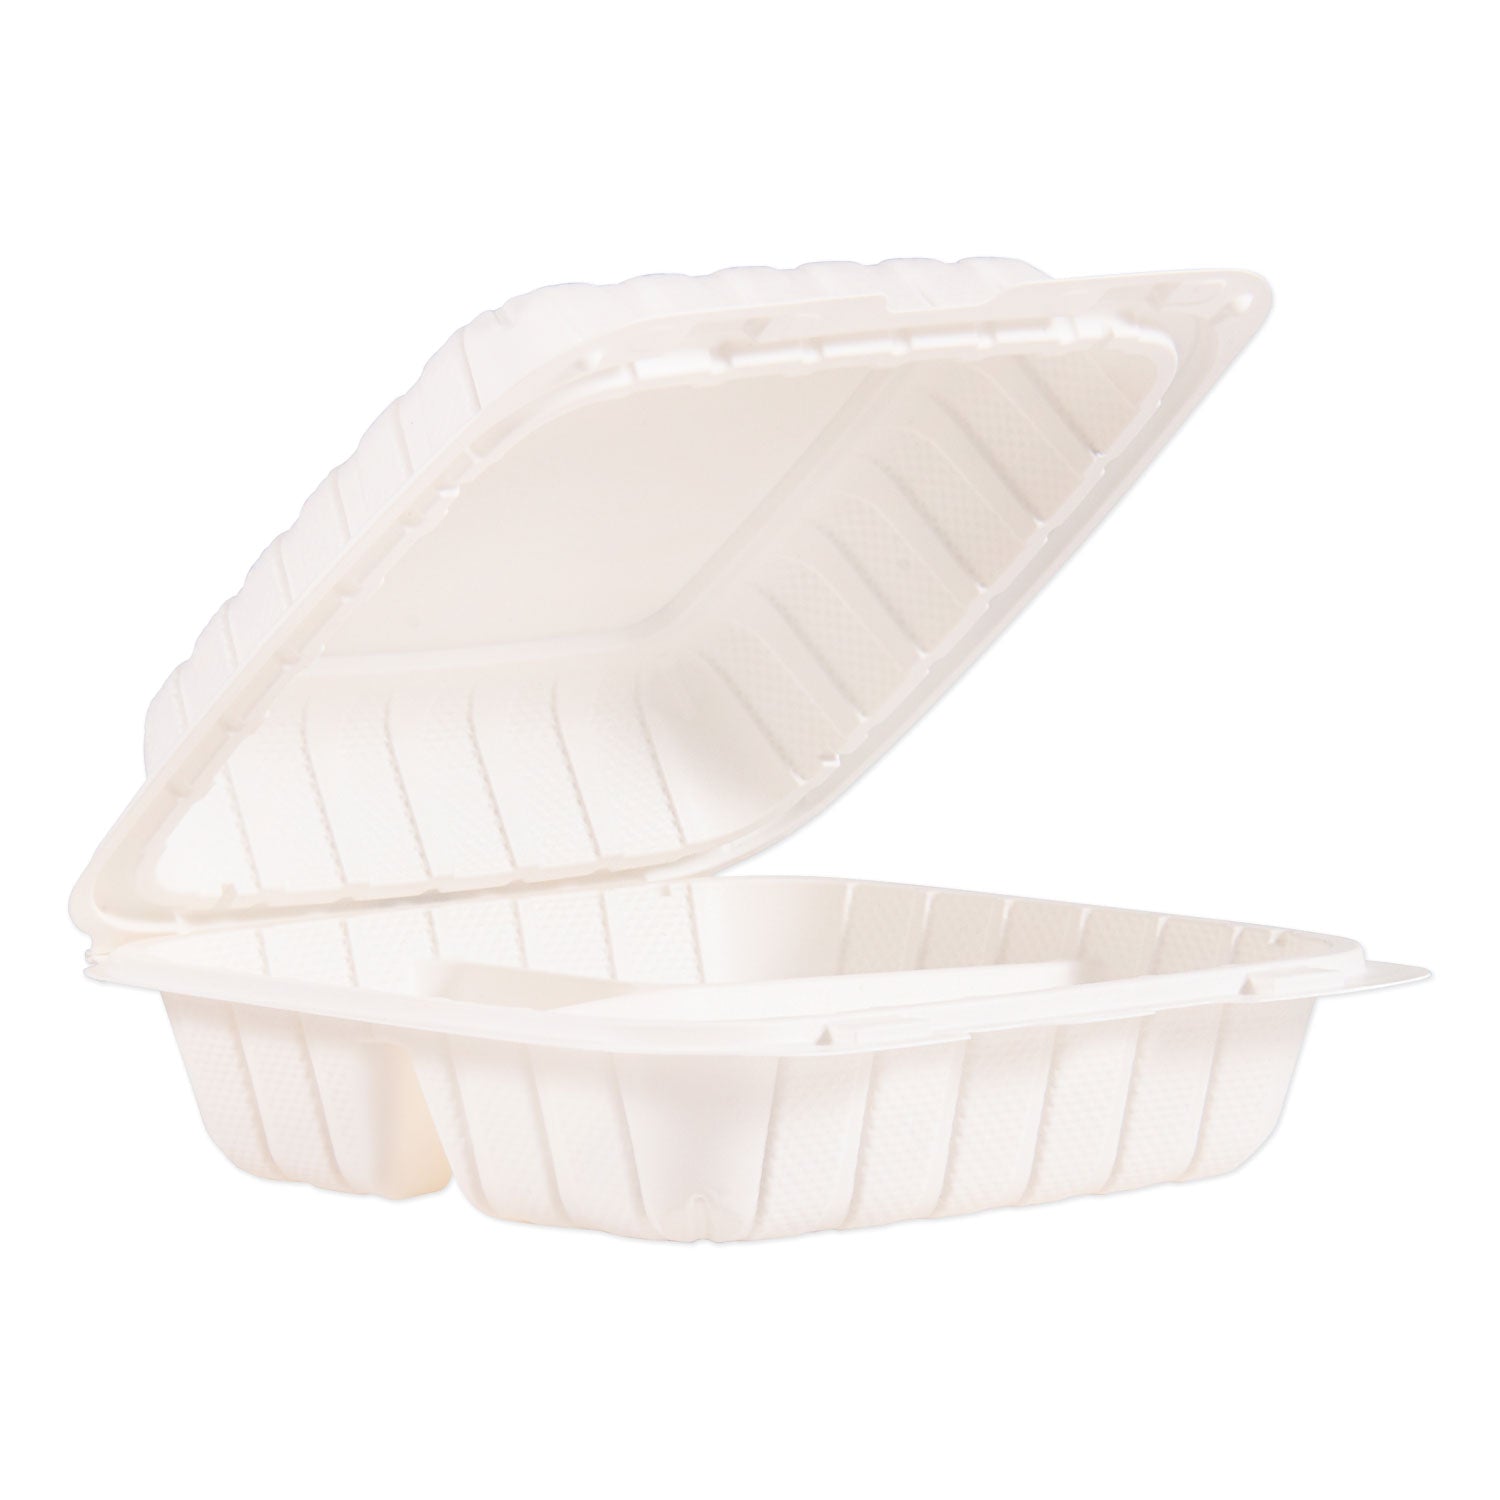 hinged-lid-containers-3-compartment-83-x-8-x-3-white-plastic-150-carton_dcc85mfppht3 - 1